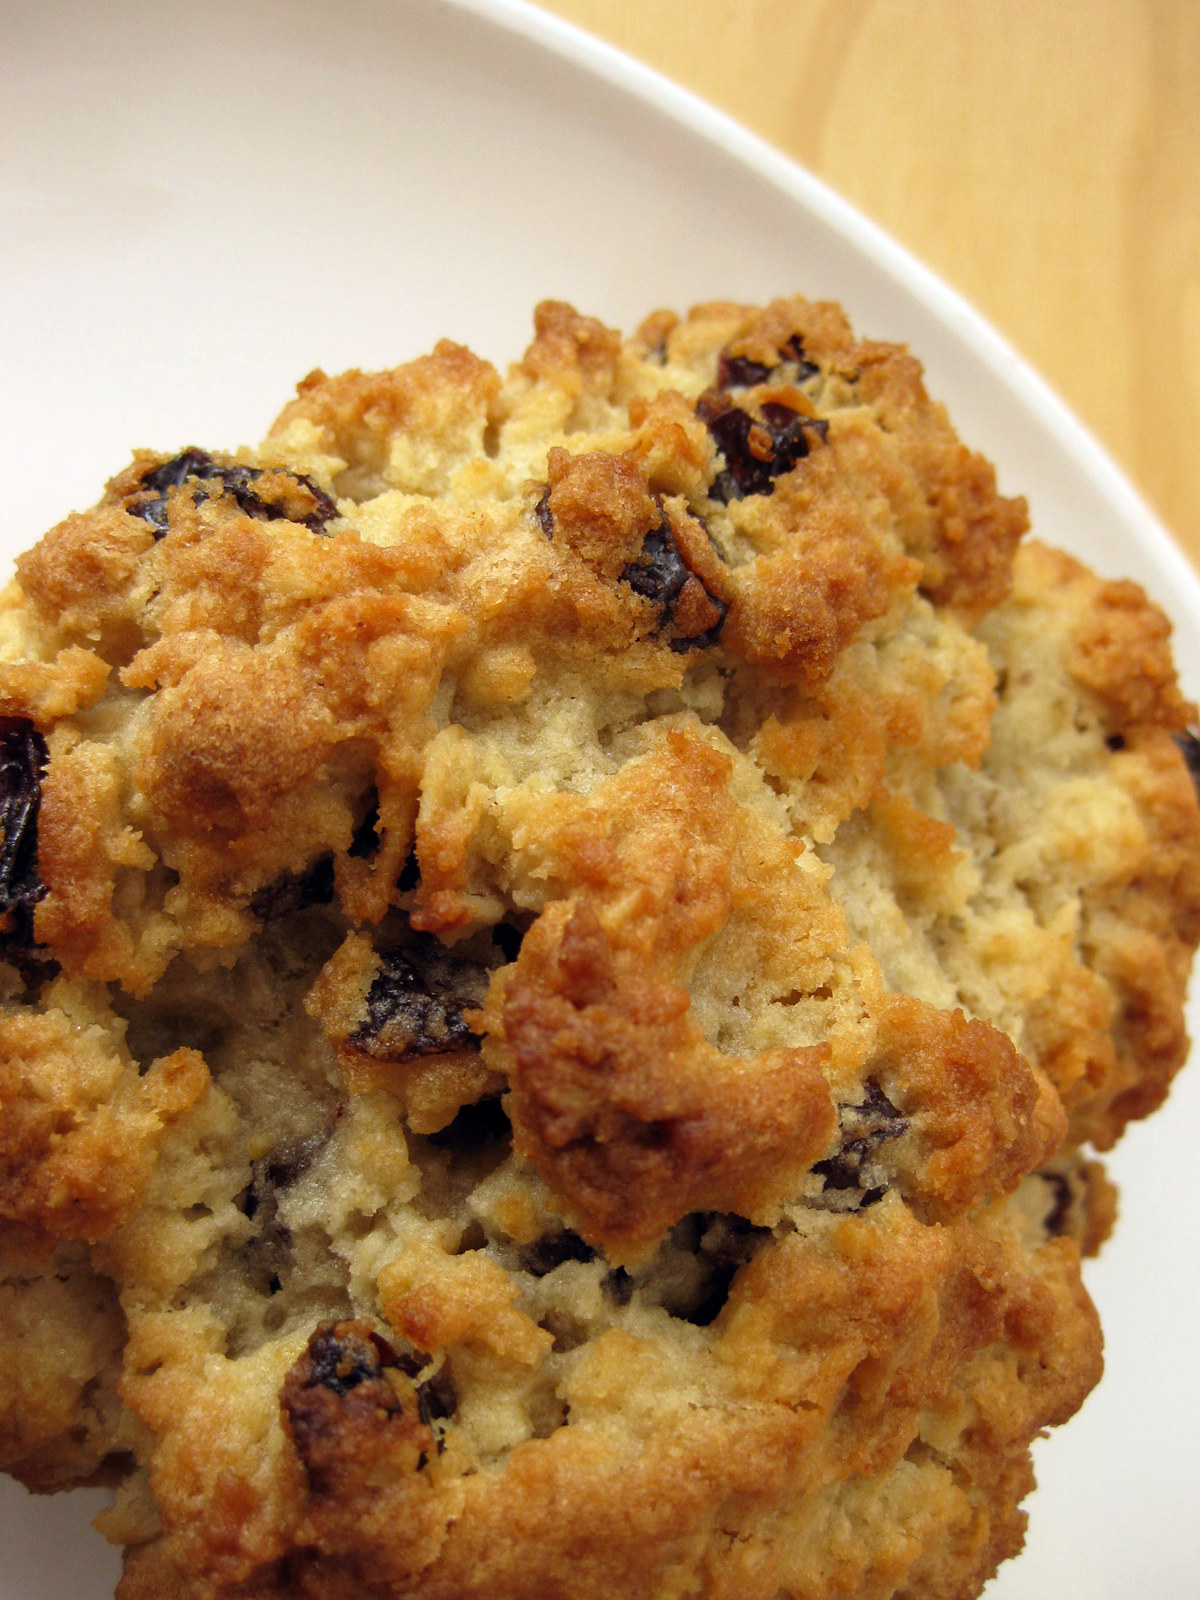 A close-up of an oatmeal raisin cookie.